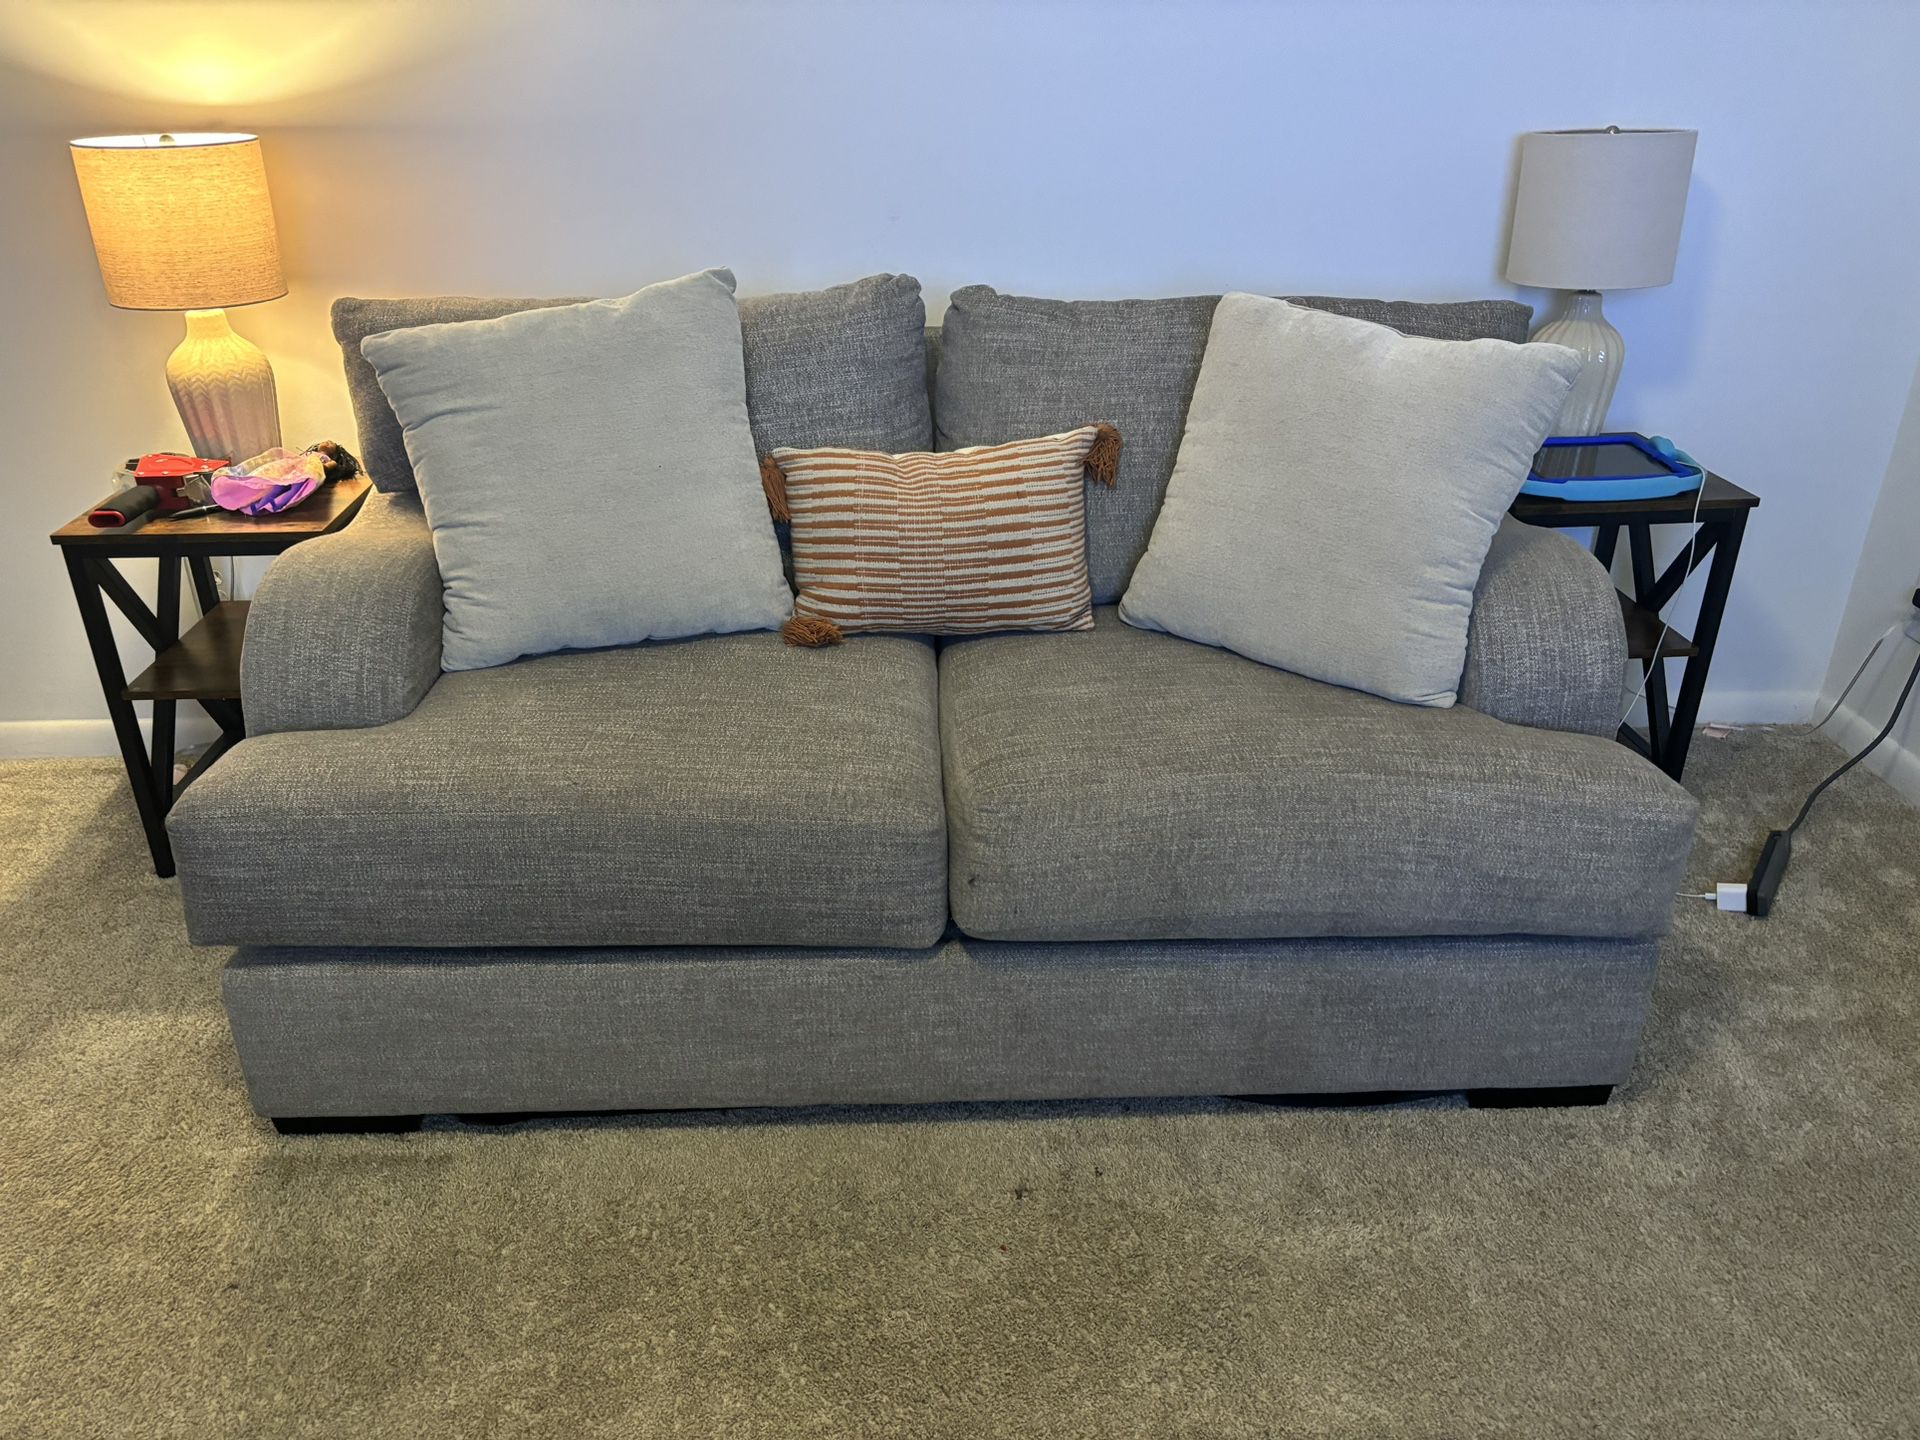 Couch-Love Seat